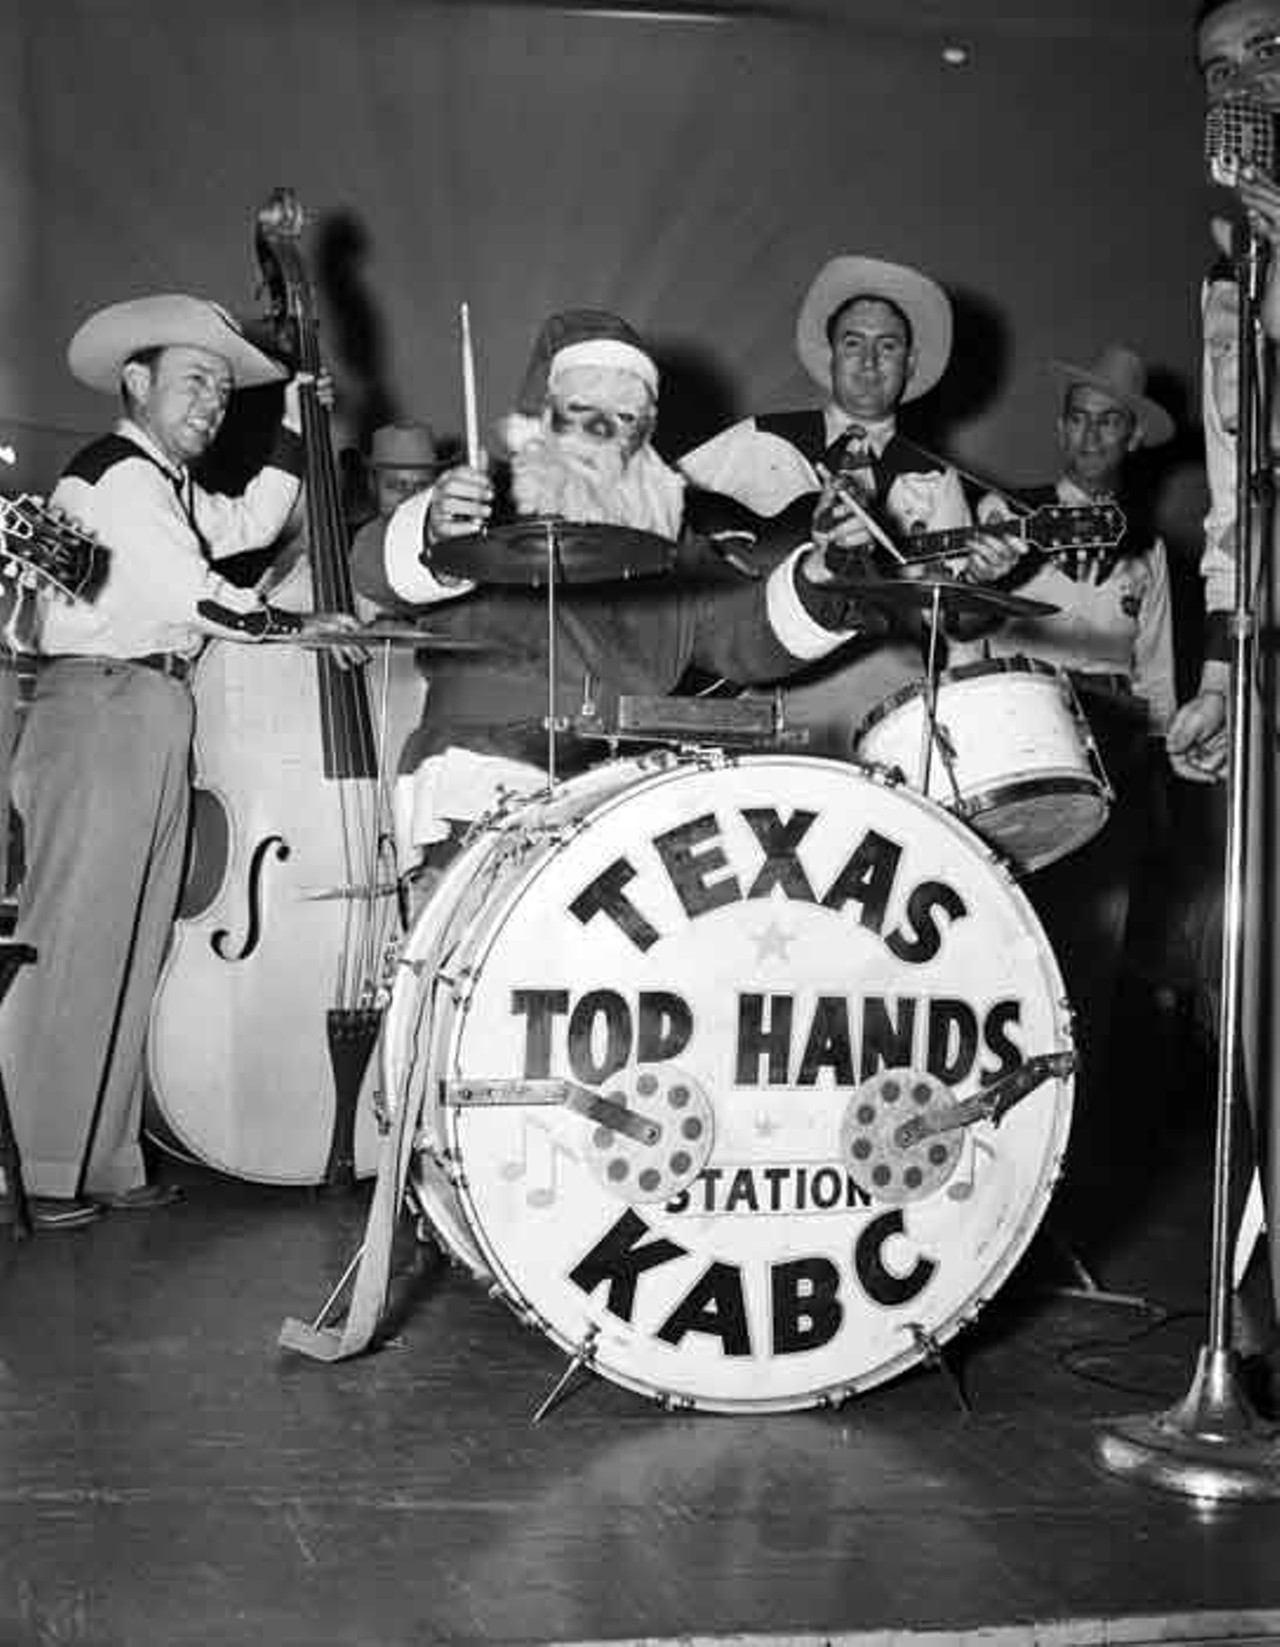 Turns out Santa Claus can rock out on the drums, too!